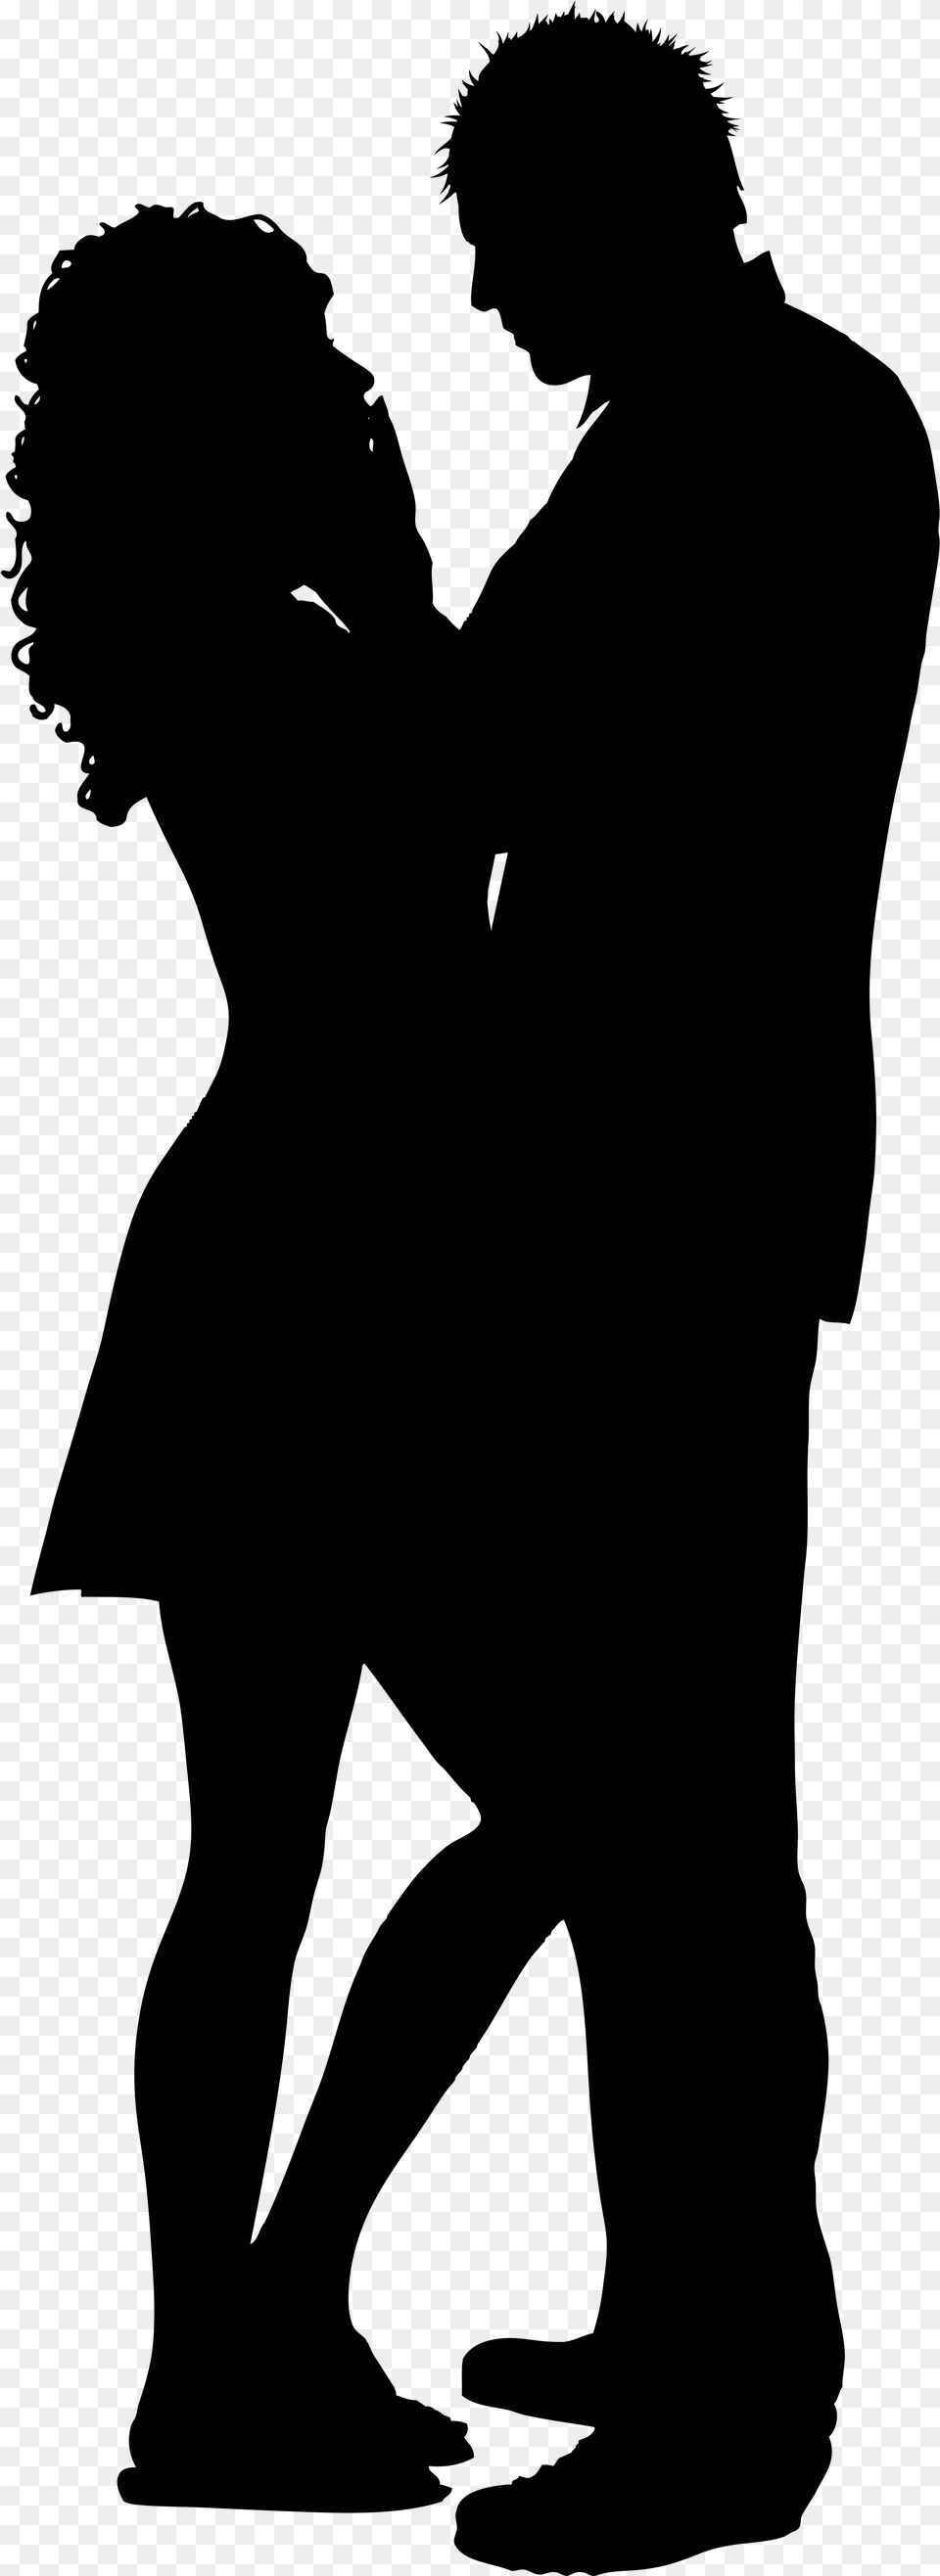 Couple Silhouette Clip Art Image Happy Couple Silhouette Free Png